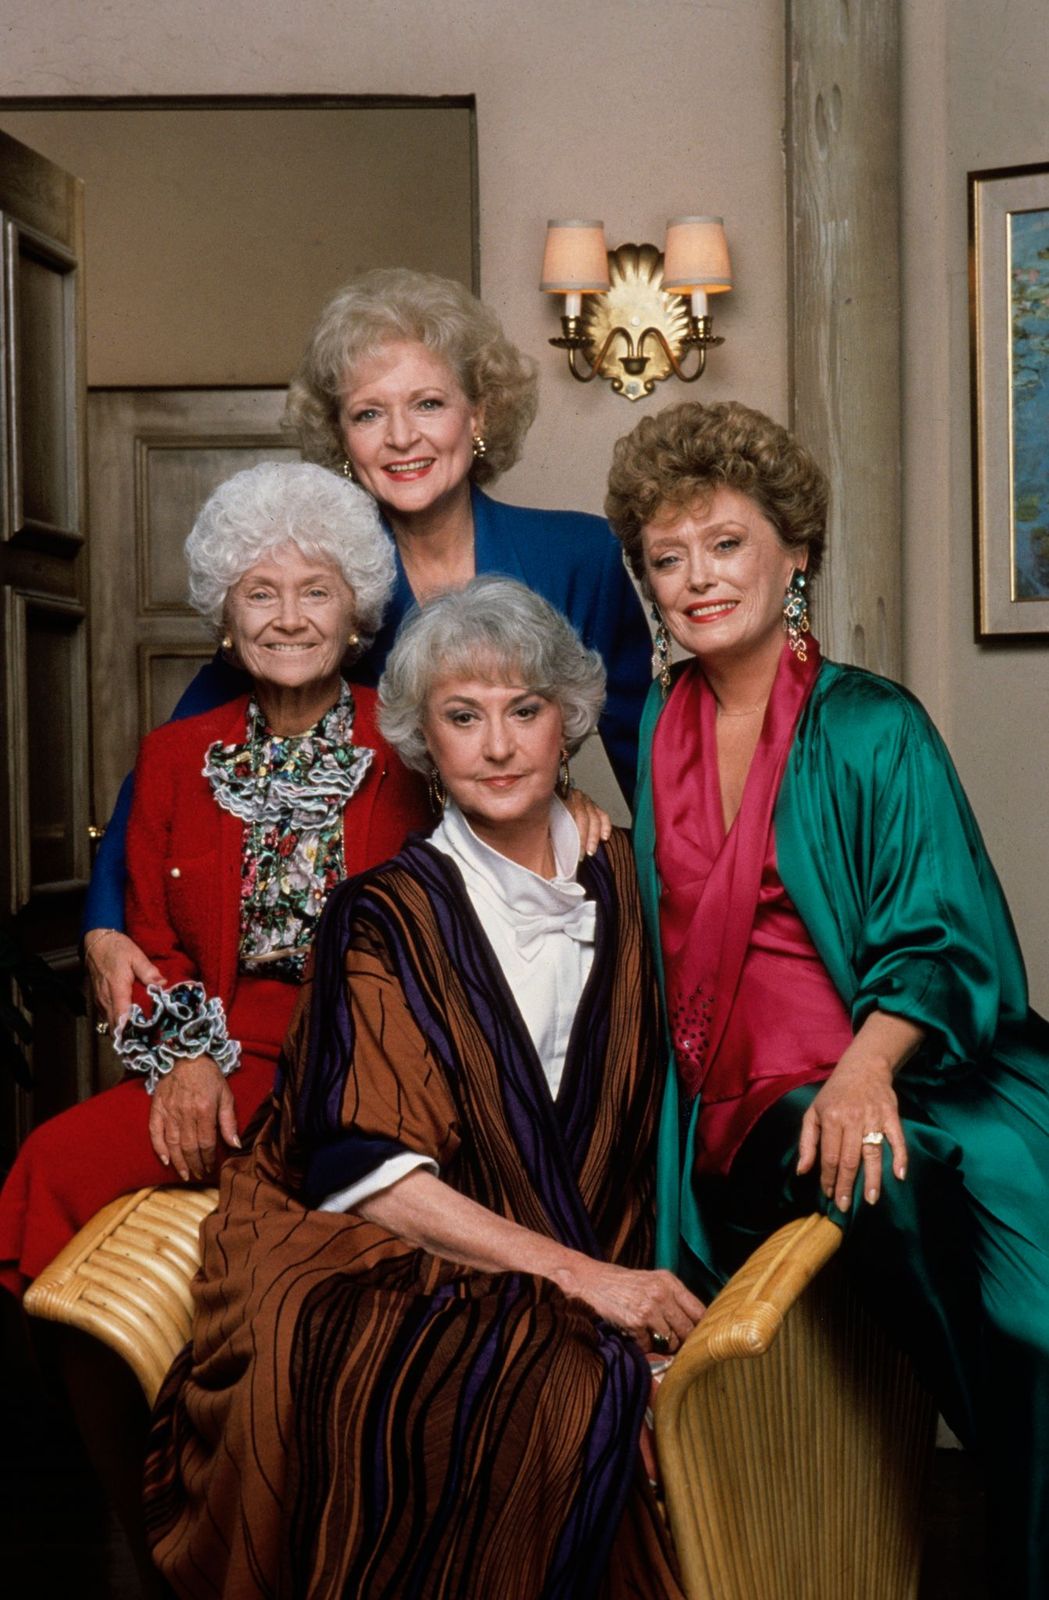 Betty White (Rose); Estelle Getty (Sophia), Rue McClanahan (Blanche); Bea Arthur (Dorothy). Picture uploaded on April 8, 2008 | Photo: Walt Disney Television/Getty Images